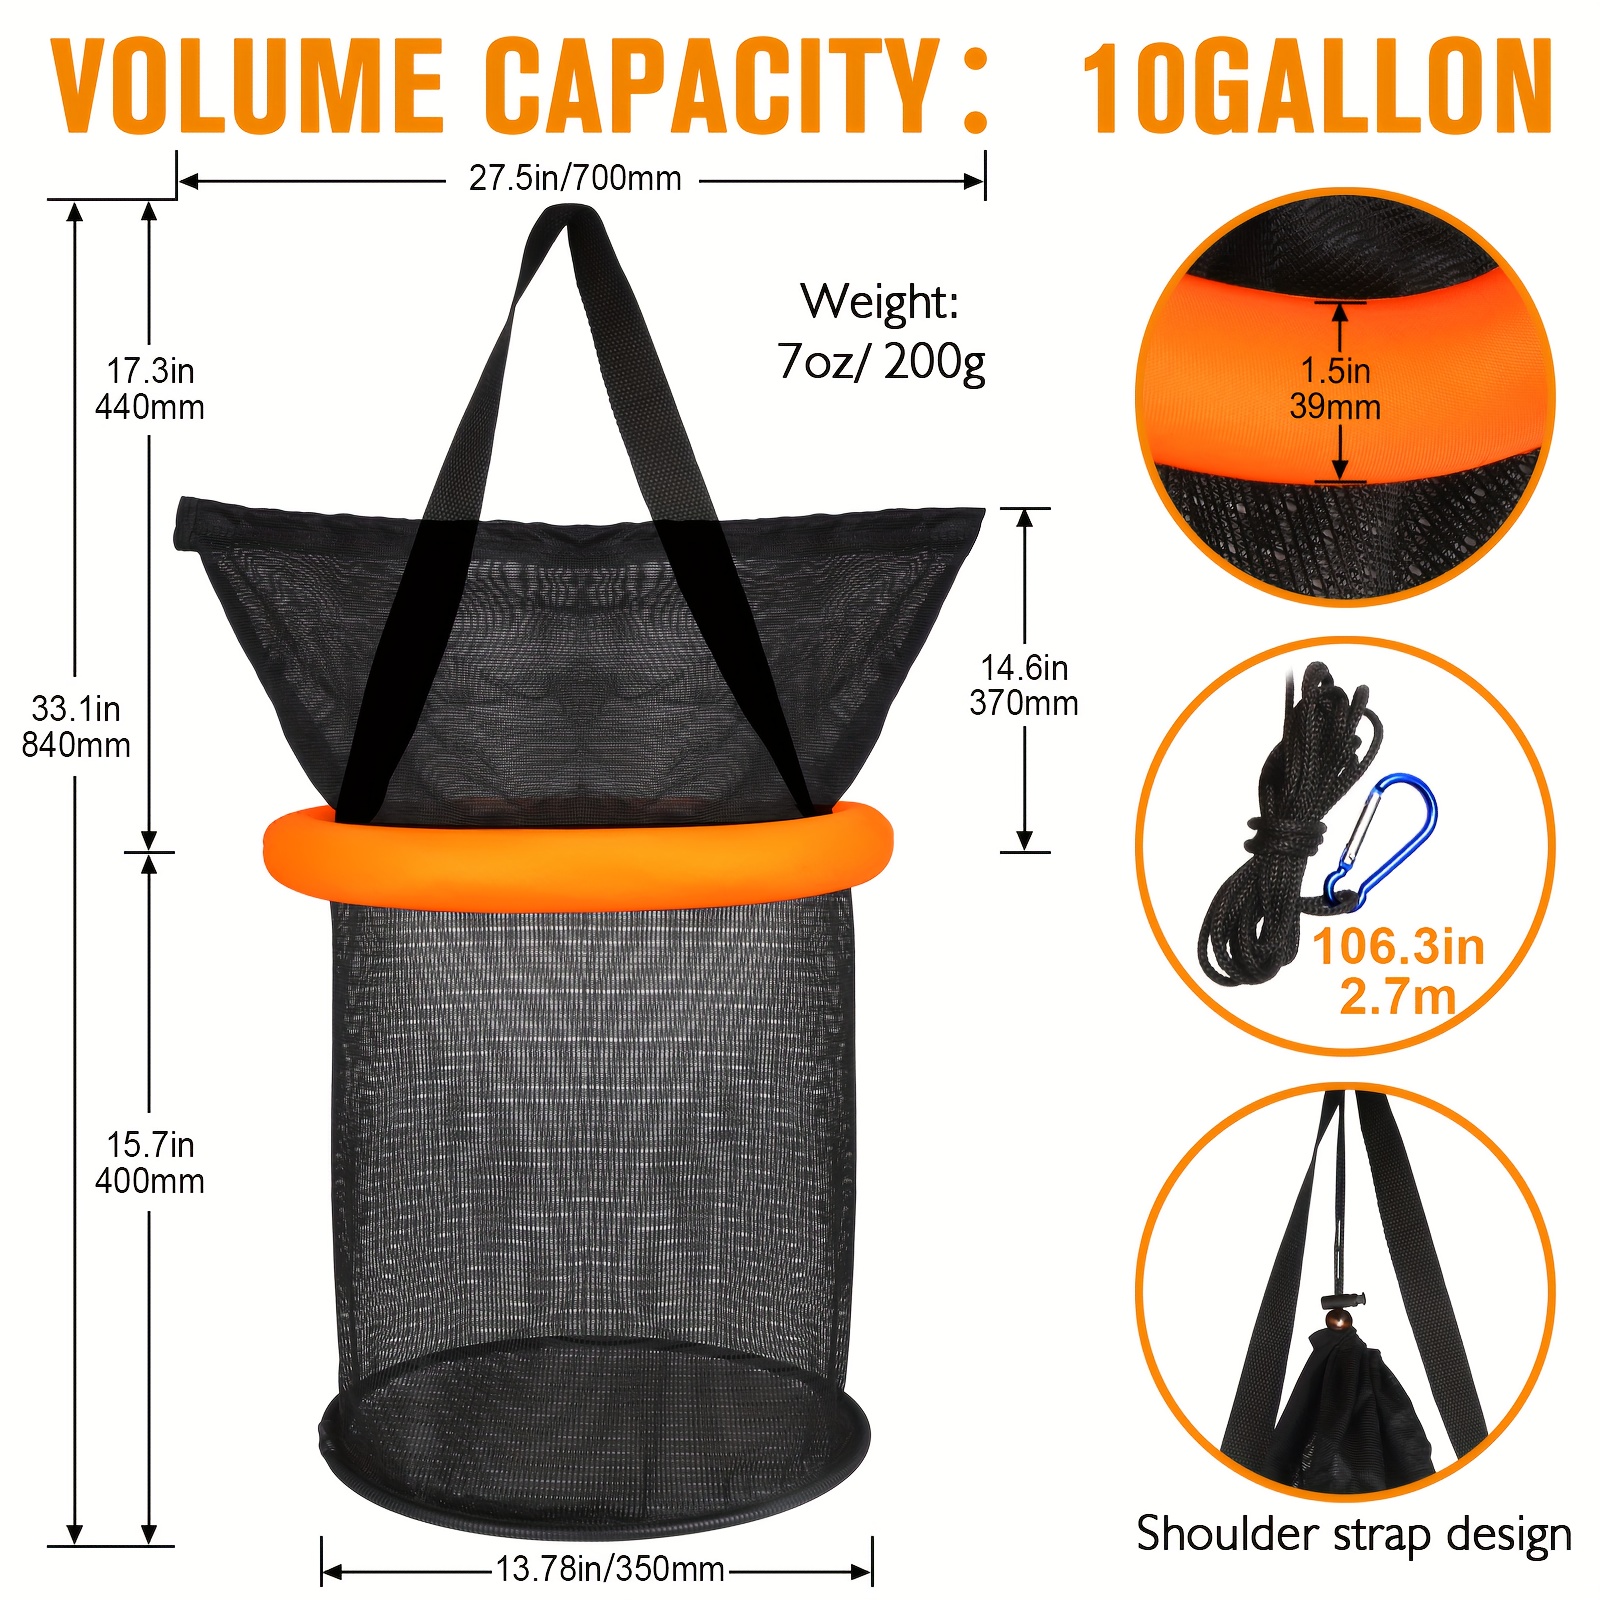 Portable Fishing Basket - Foldable Nylon-Mesh Net for Keeping Crayfish,  Minnows, Leaches & Other Live Baits